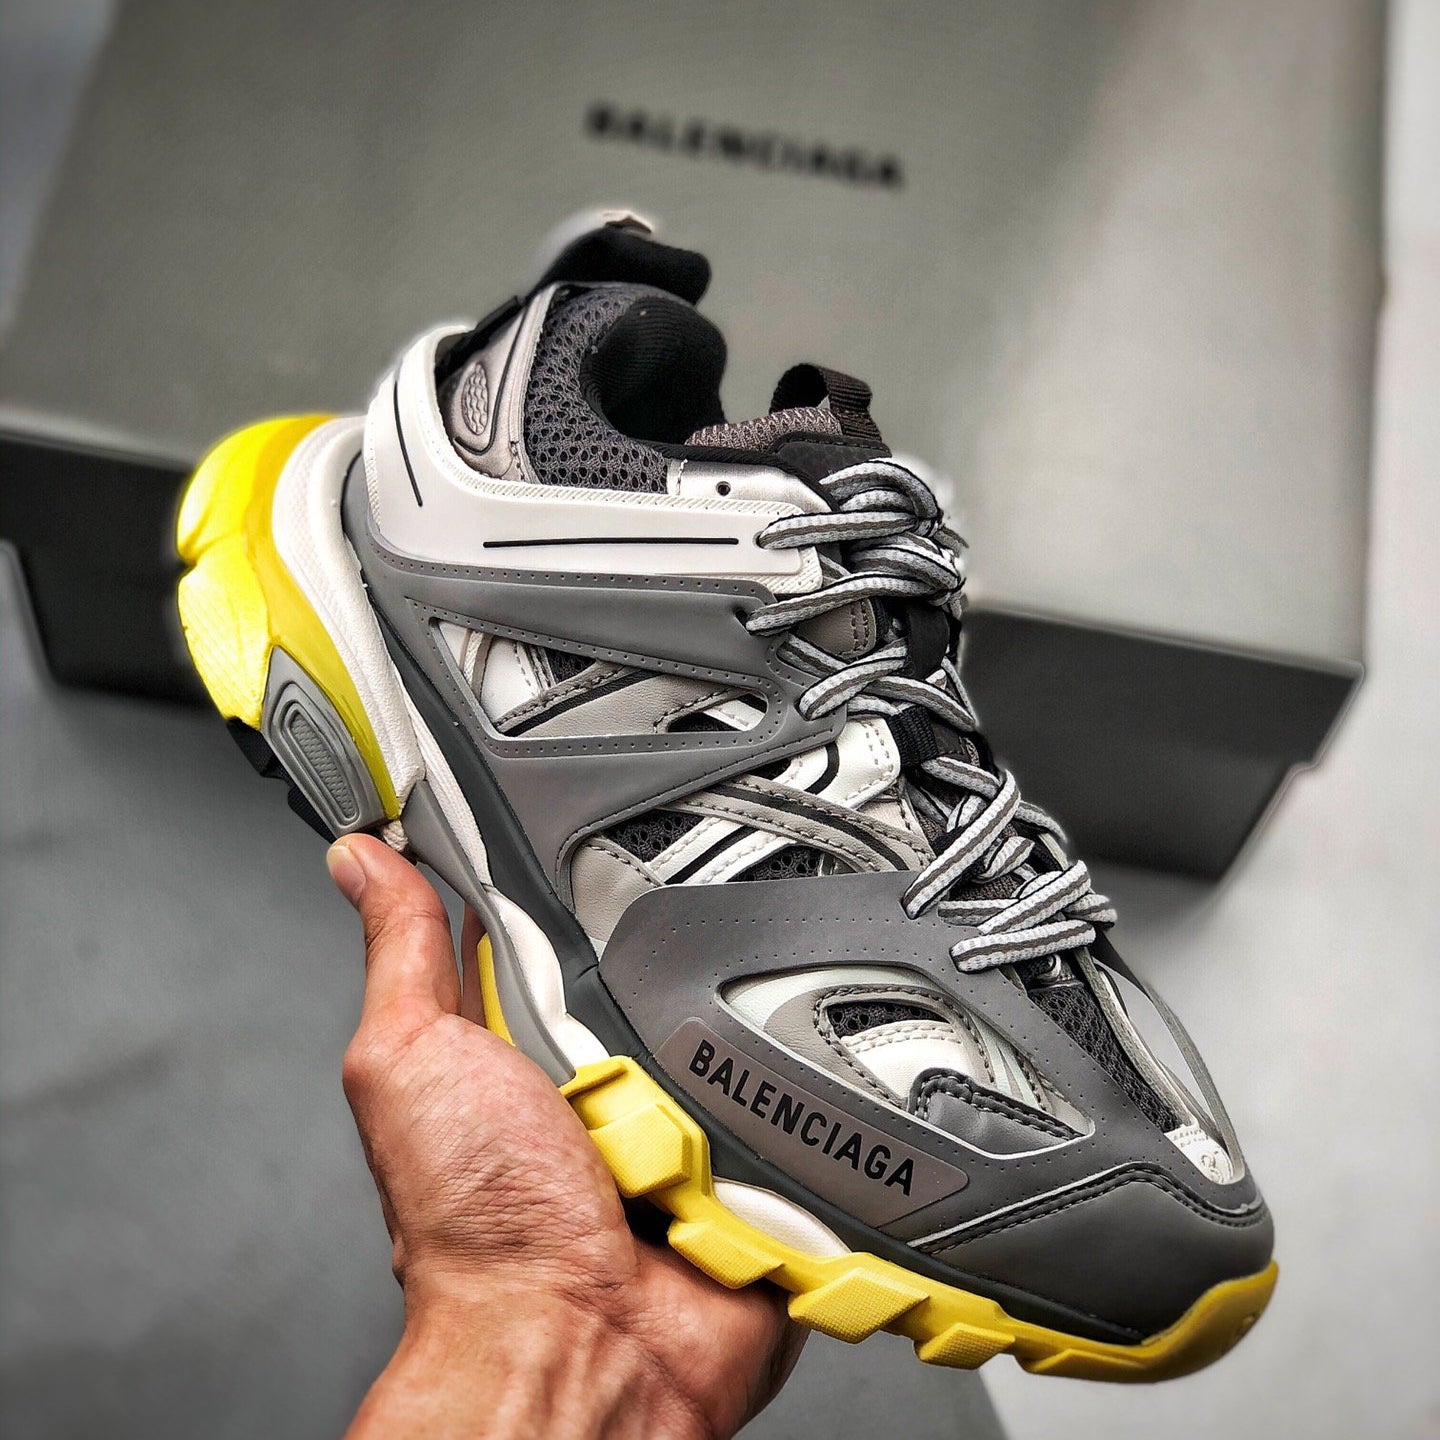 Balenciaga Track 3 Men's and Women's Sneakers Shoes